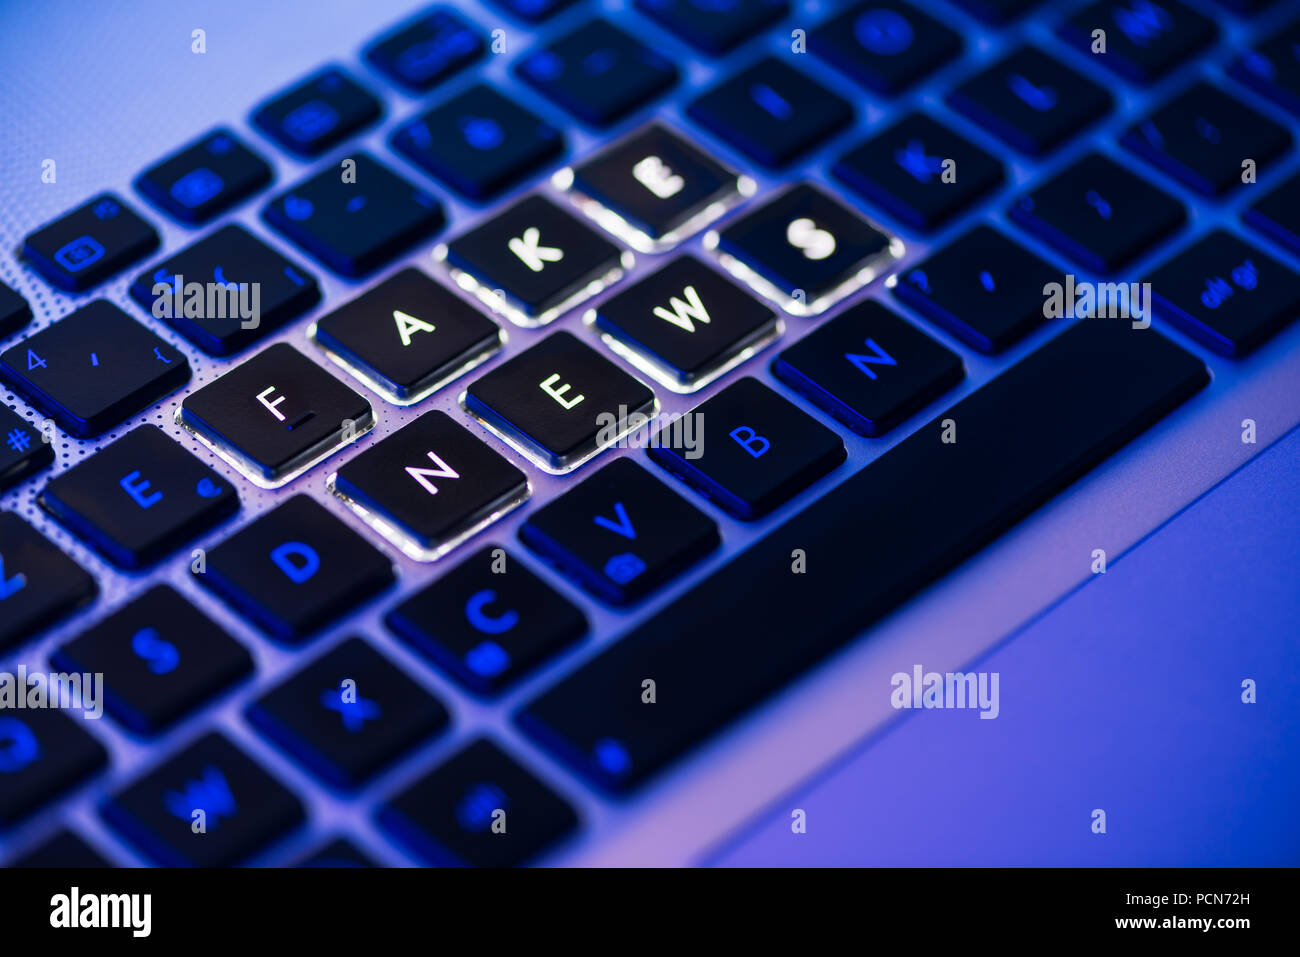 Fake news written on a backlit laptop keyboard close-up with selective focus in a blue ambiant light Stock Photo